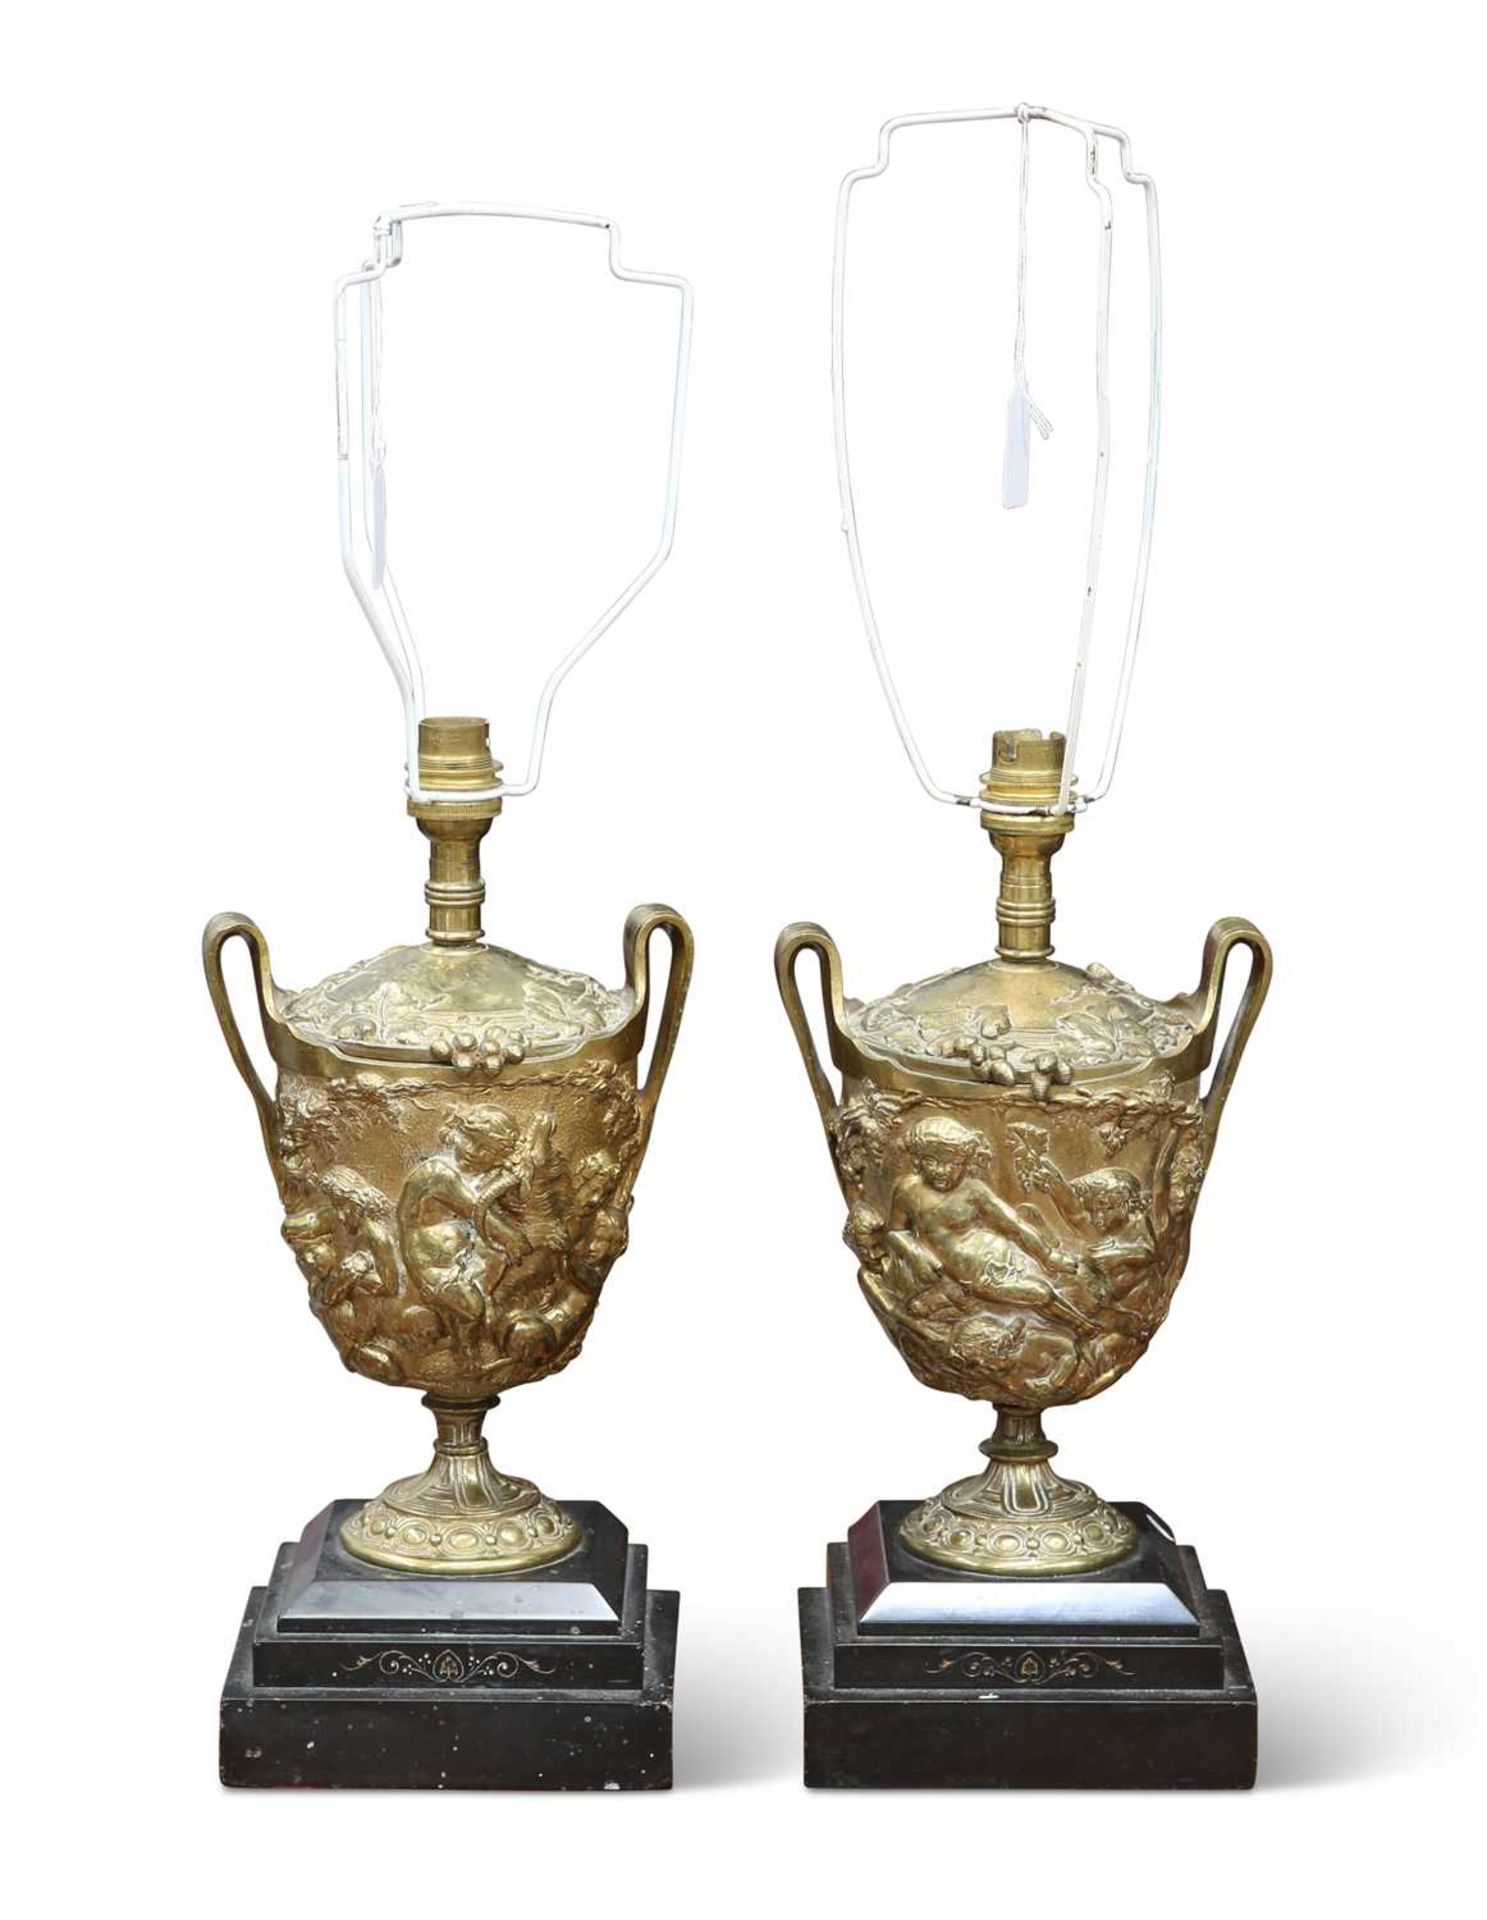 A PAIR OF 19TH CENTURY BRONZE TABLE LAMPS